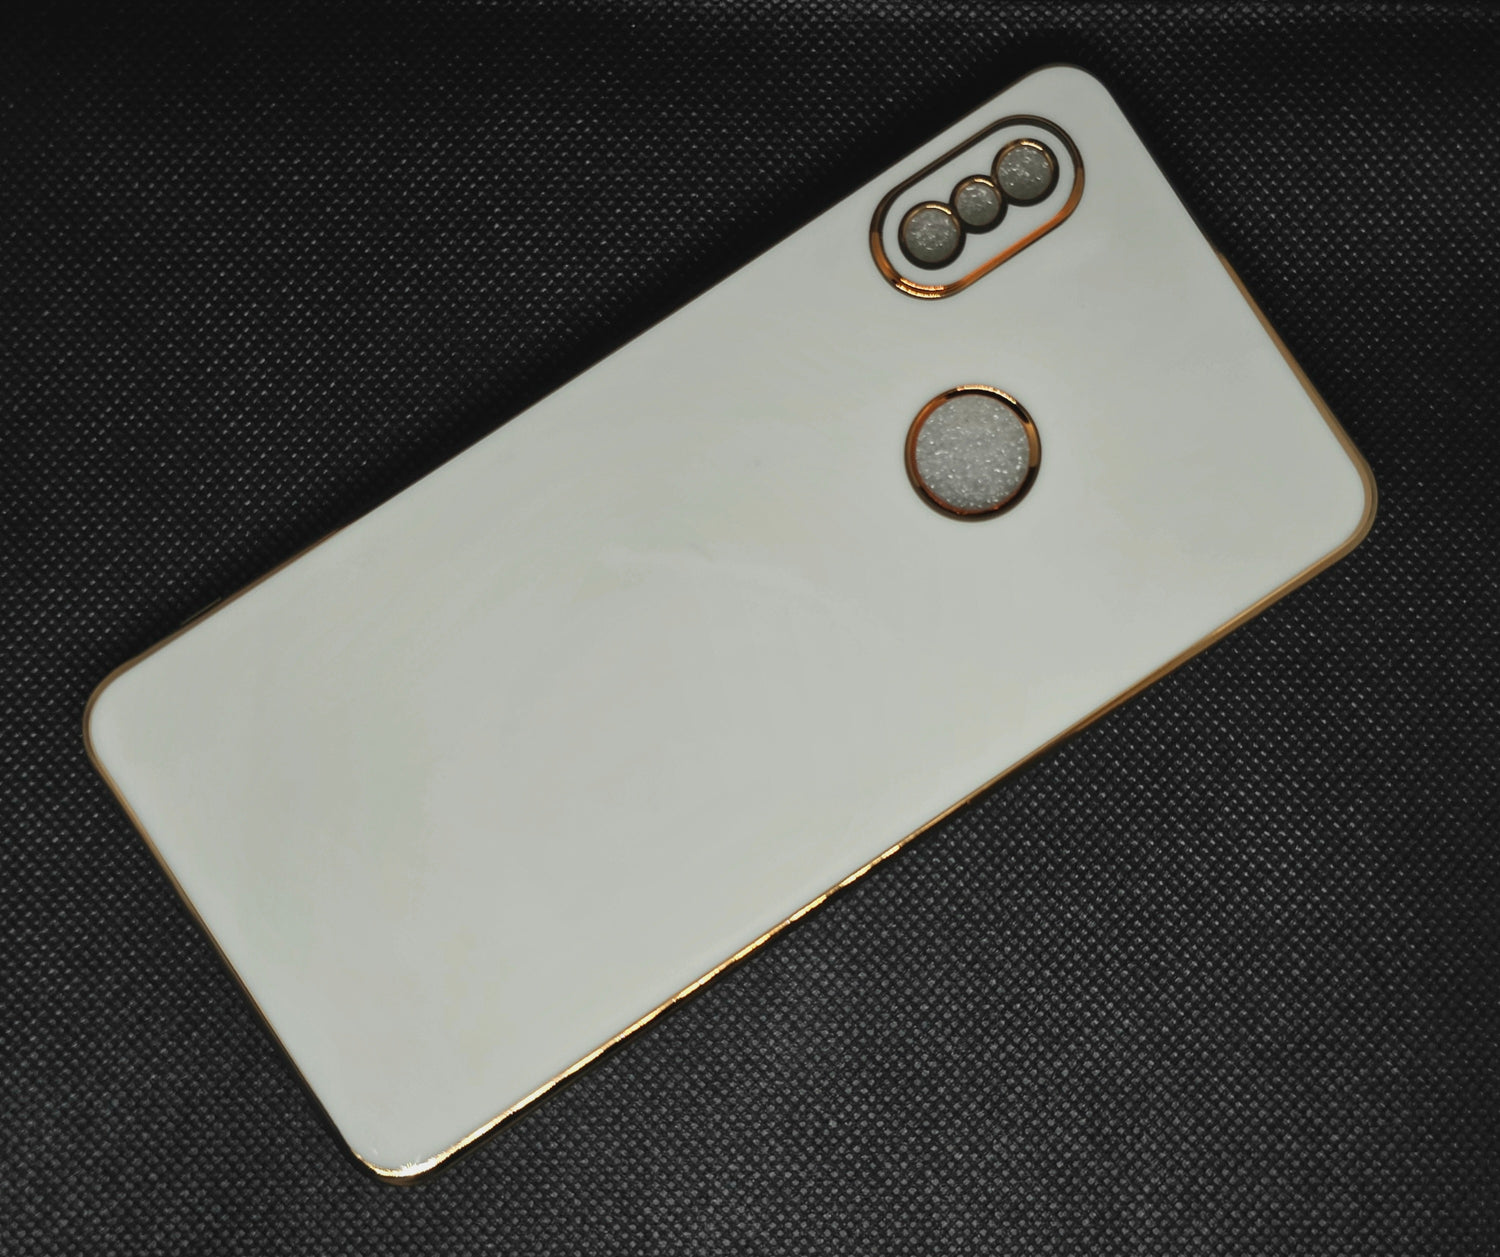 Buy Xiaomi Redmi Note 5 Pro Mobile Back Covers